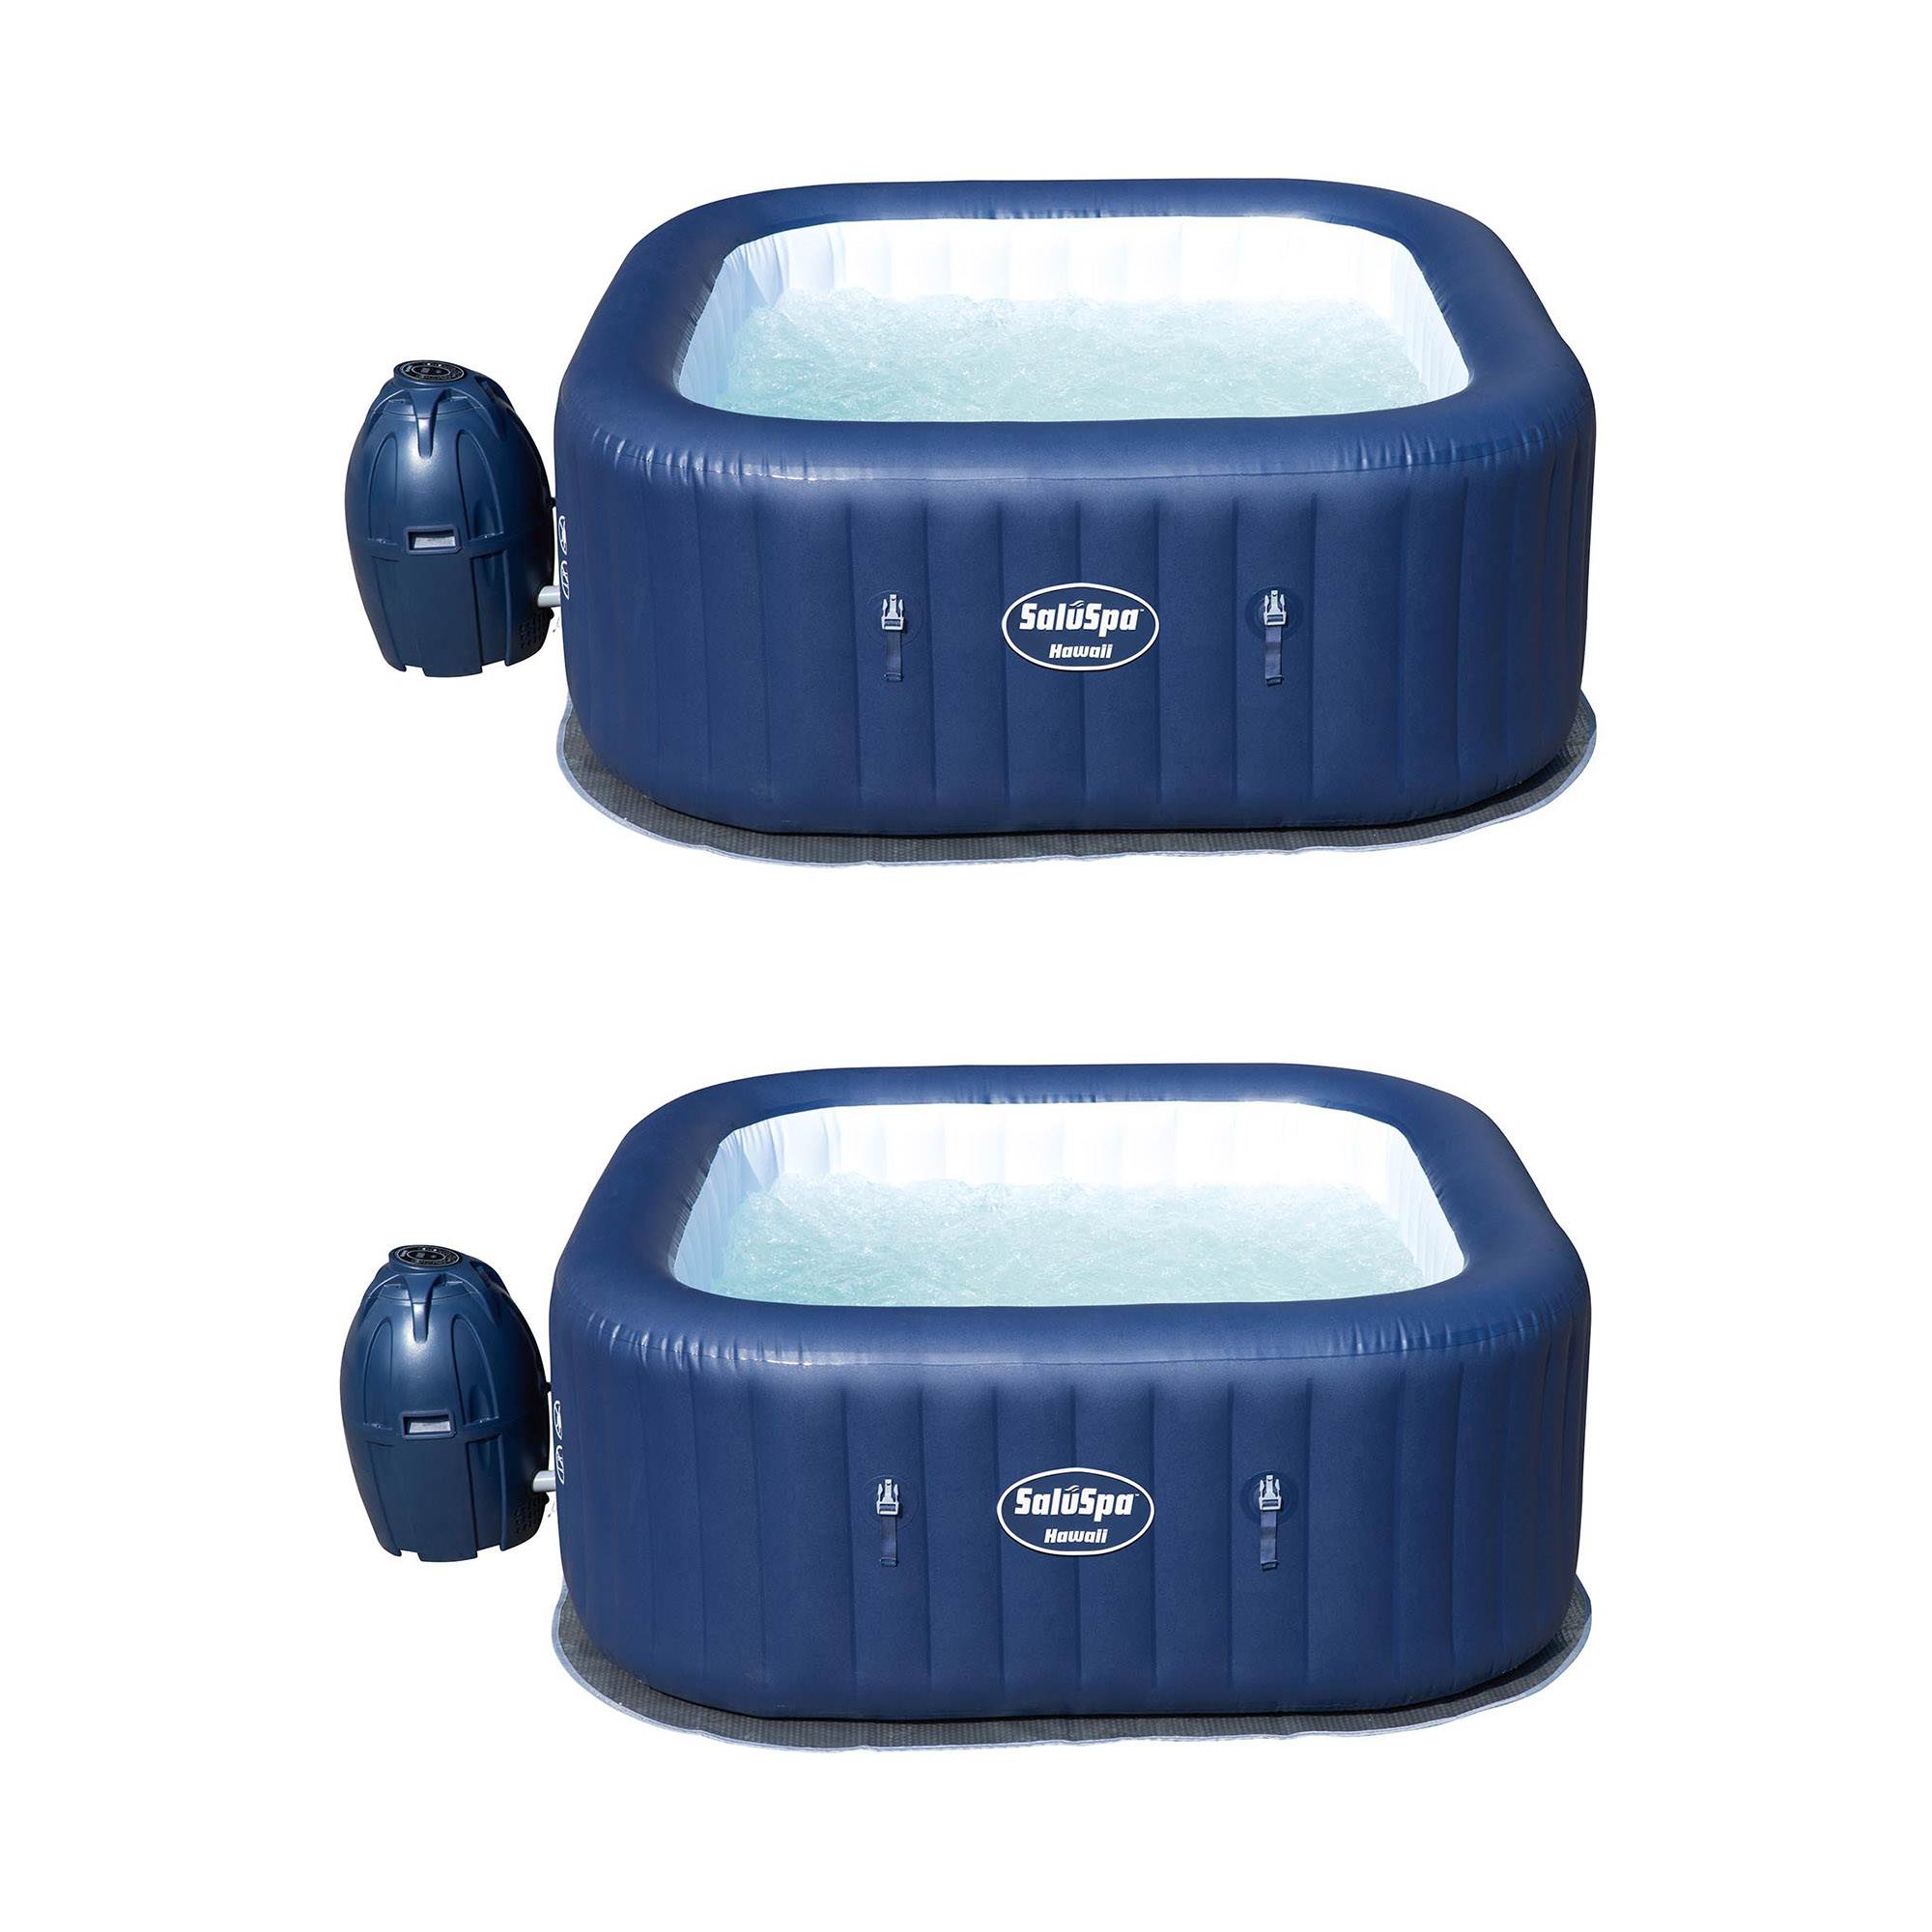 Bestway Tub at Inflatable 4-Person Square Hot